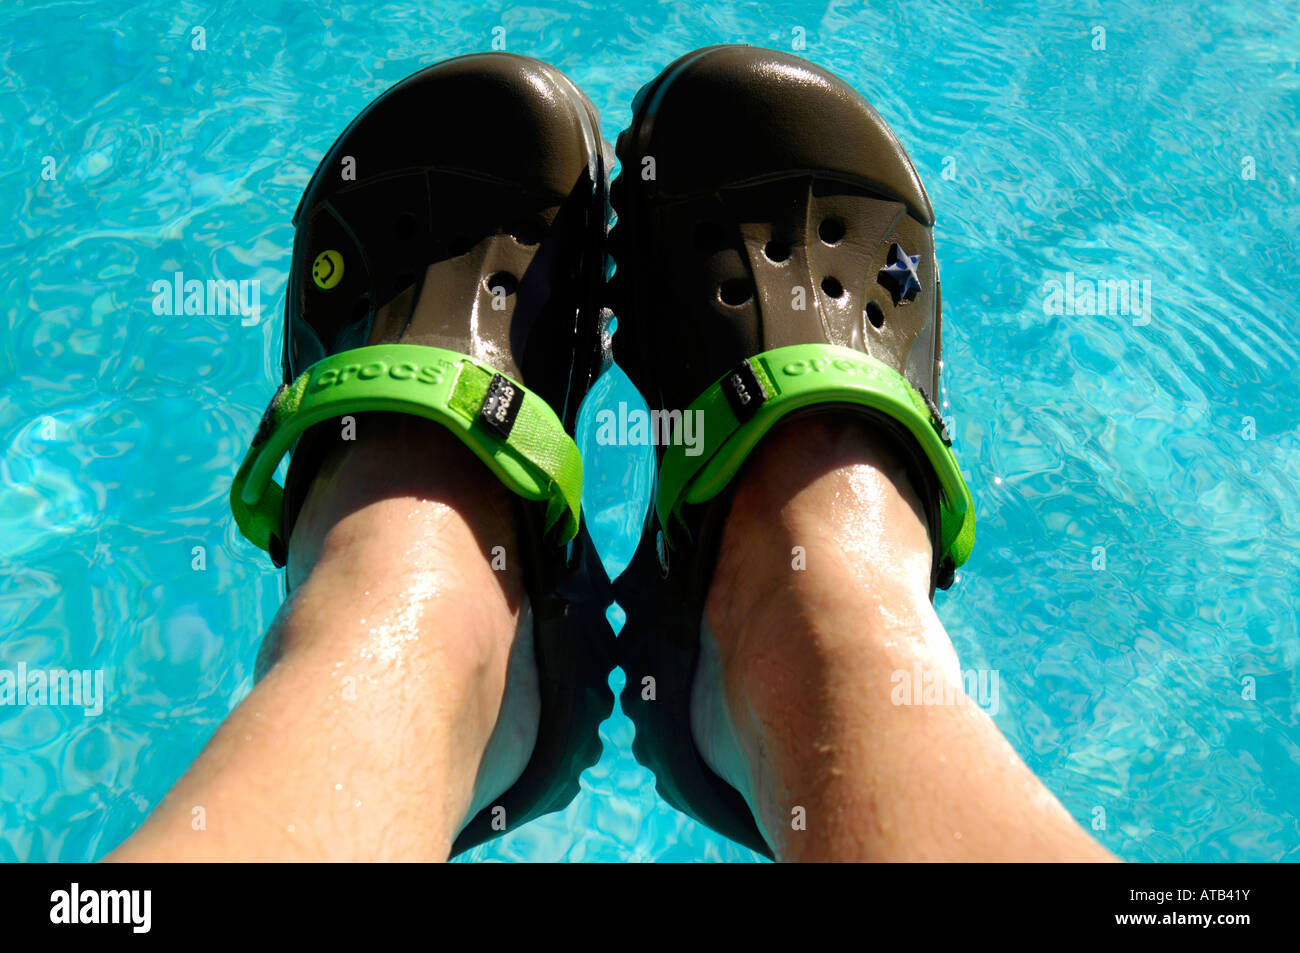 crocs chocolate lime offroad footwear swimming pool floating shoes holiday vacation blue colour horizontal legs rest relax Stock Photo